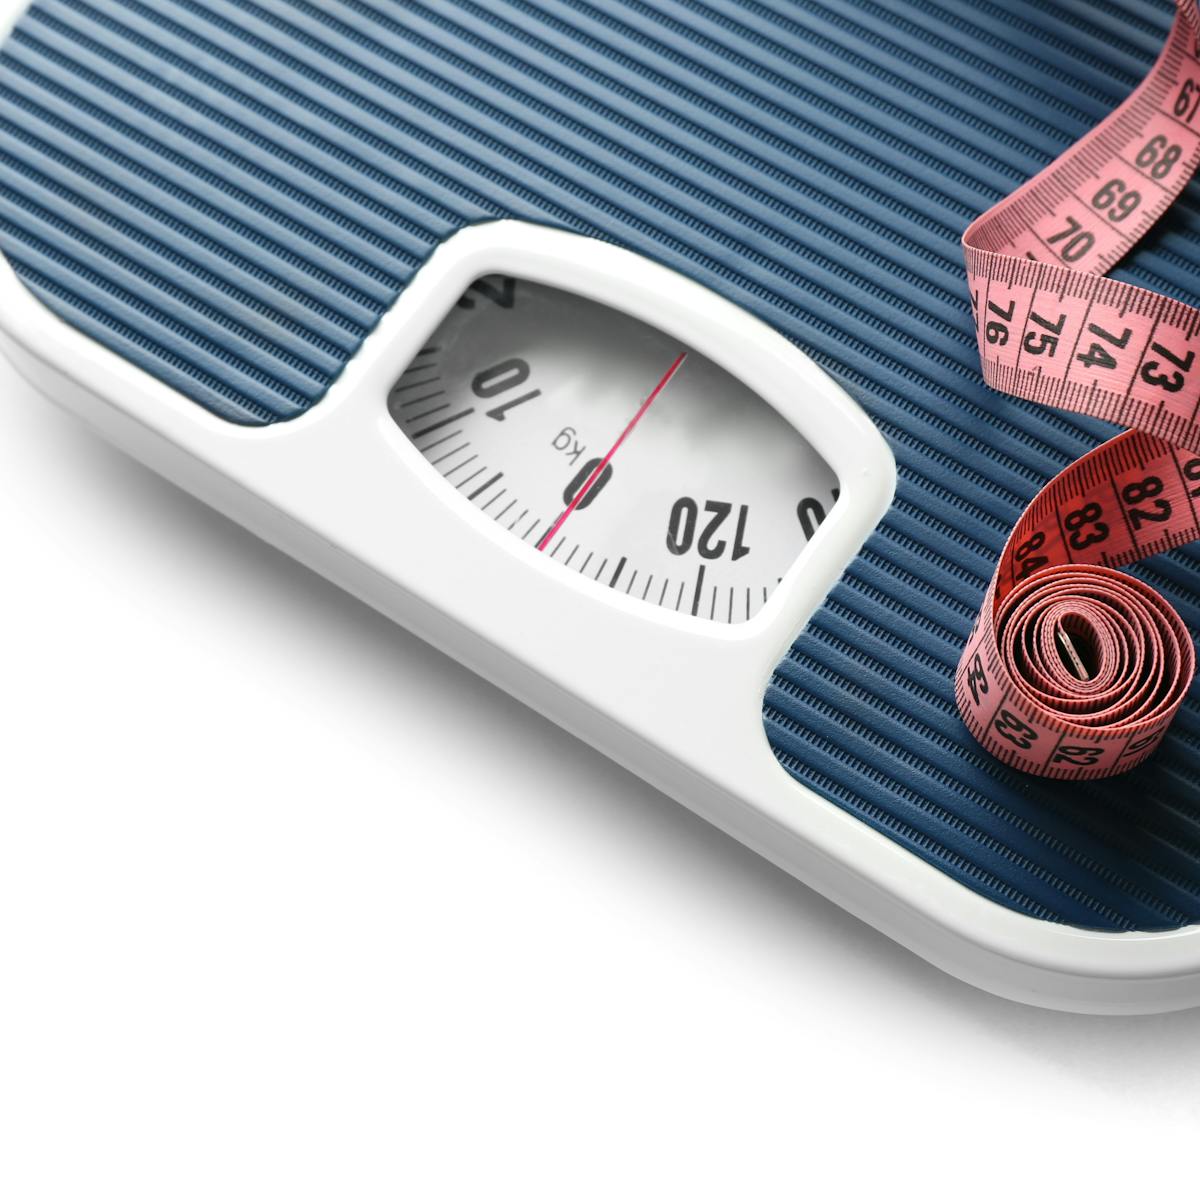 How To Use Your Bathroom Scale To Find The Right Weight Loss Strategy